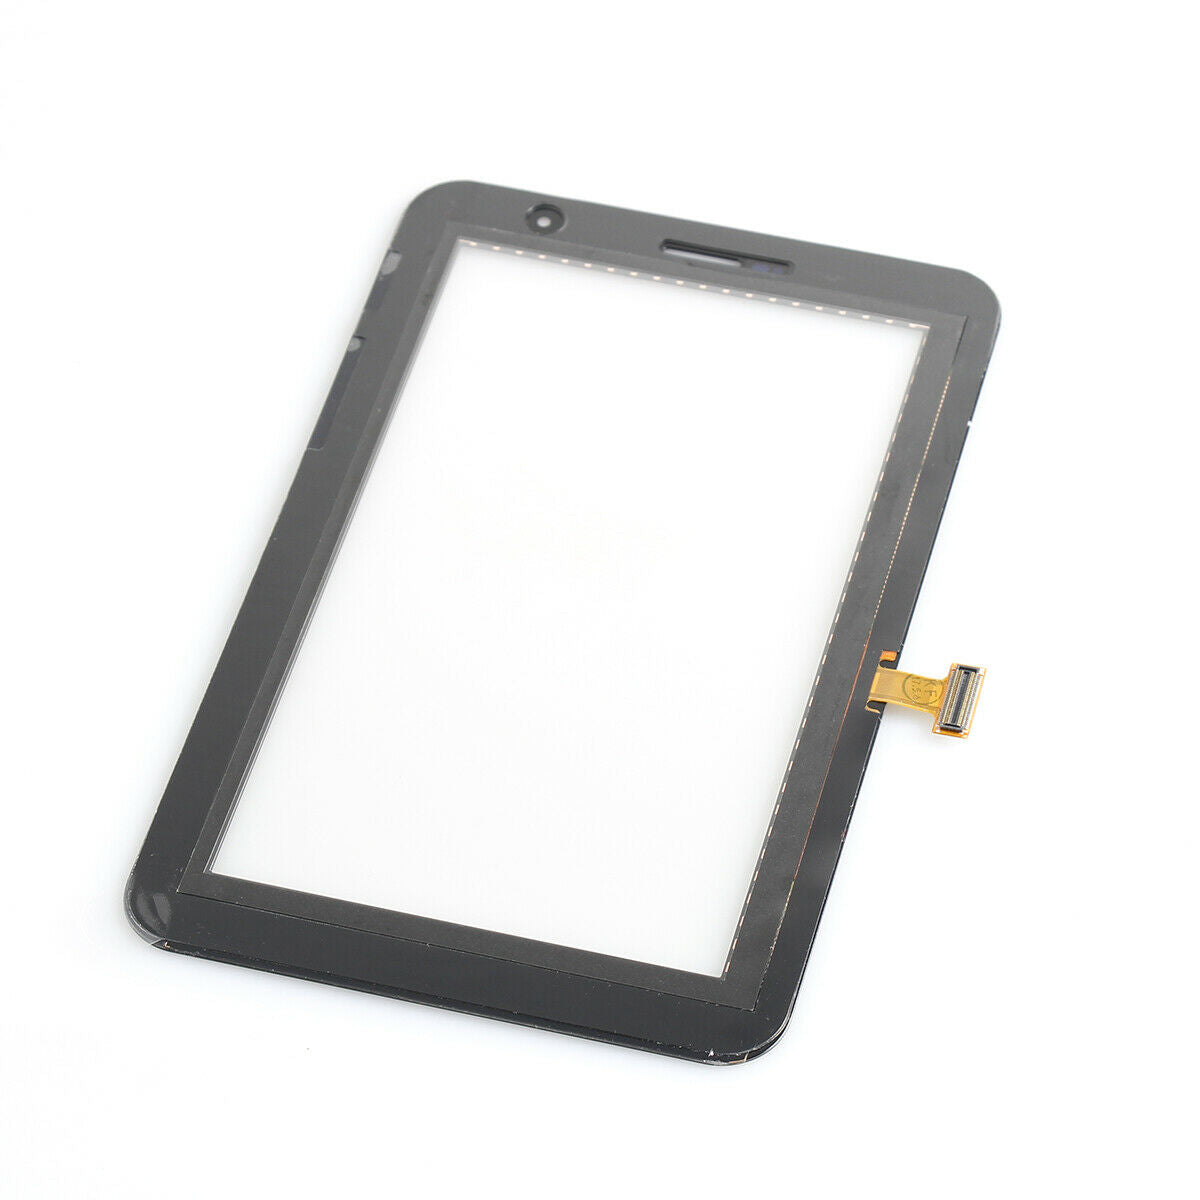 Digitizer Touch Screen Glass For Samsung Galaxy Tab 7.0 Plus GT-P6200 P6210 